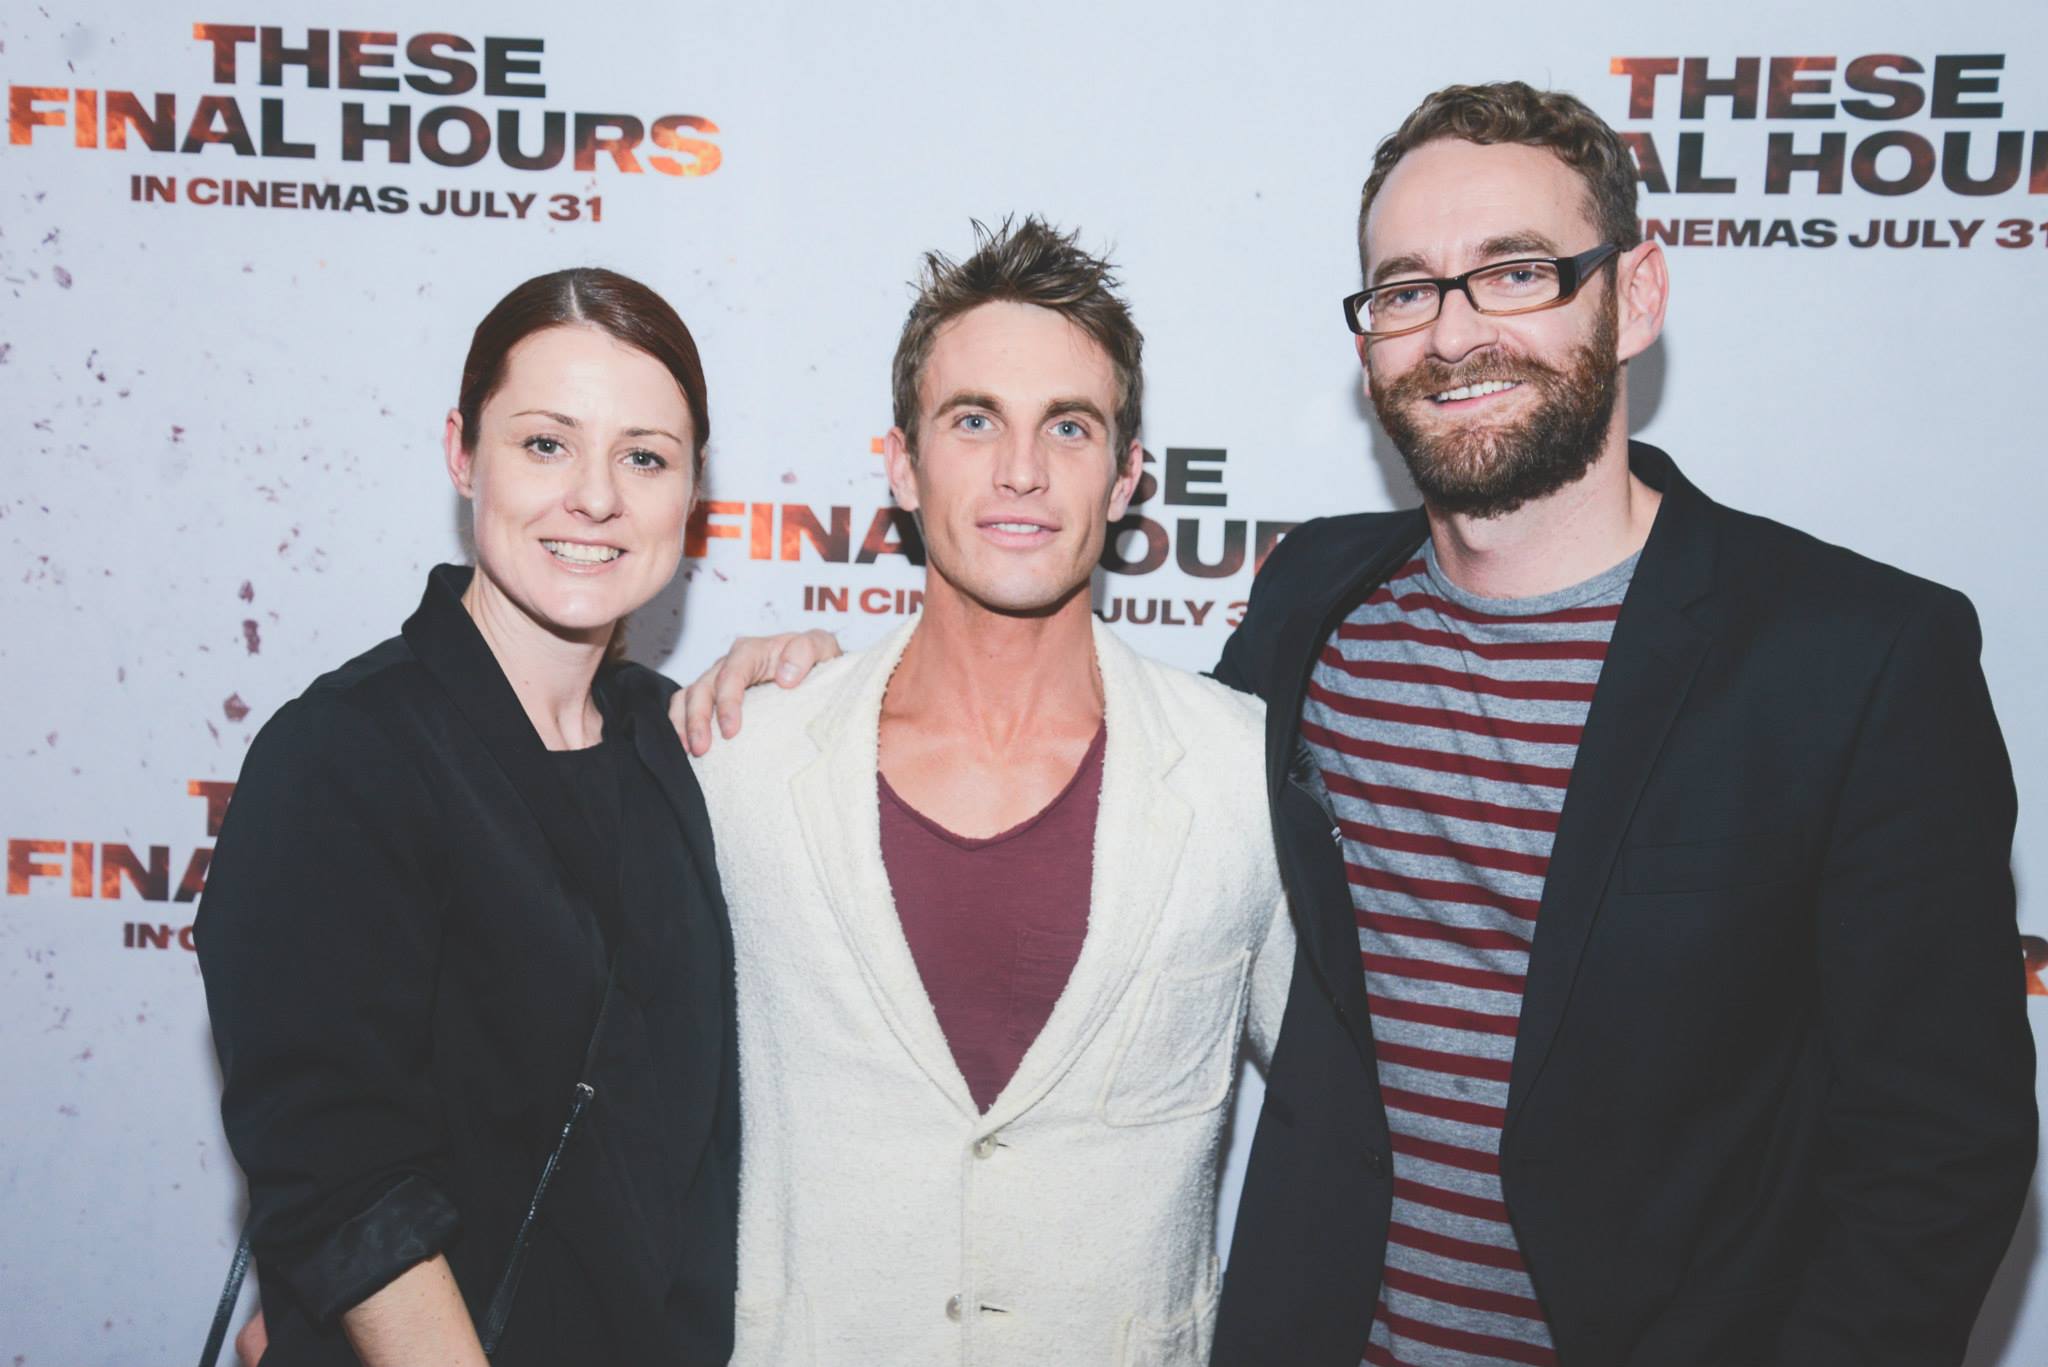 At the premiere of These Final Hours with Director Zak Hilditch (right) and produce Liz Kearney (left)